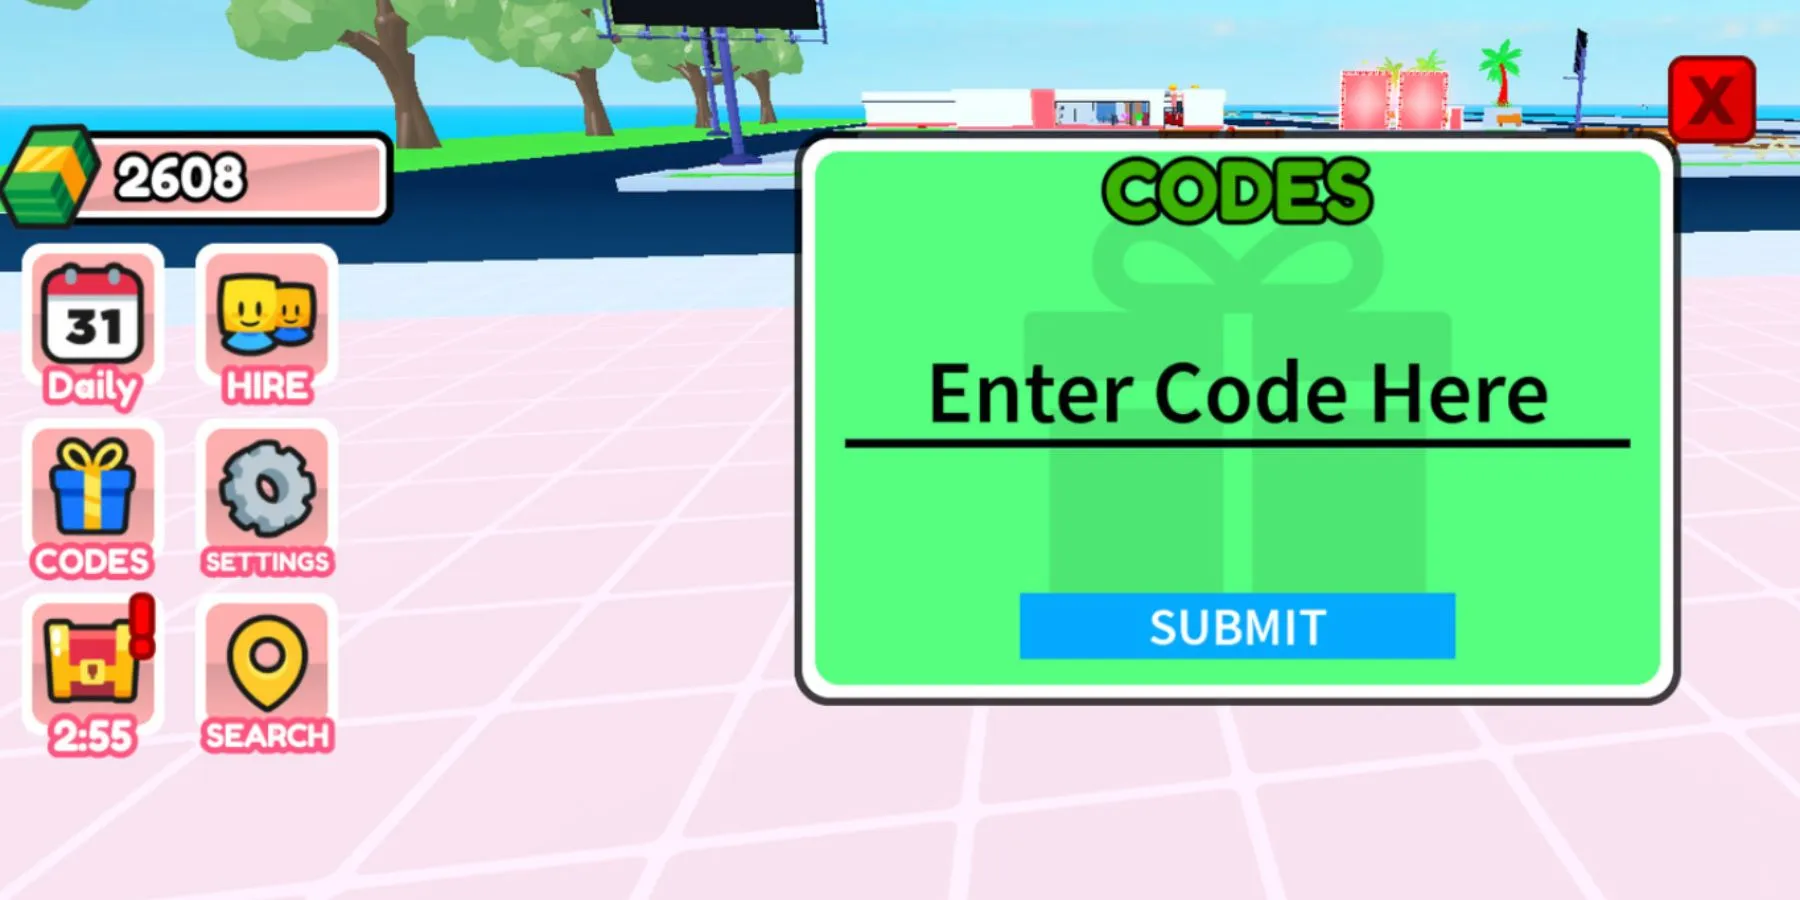 Roblox Burger Store Tycoon: the codes tab